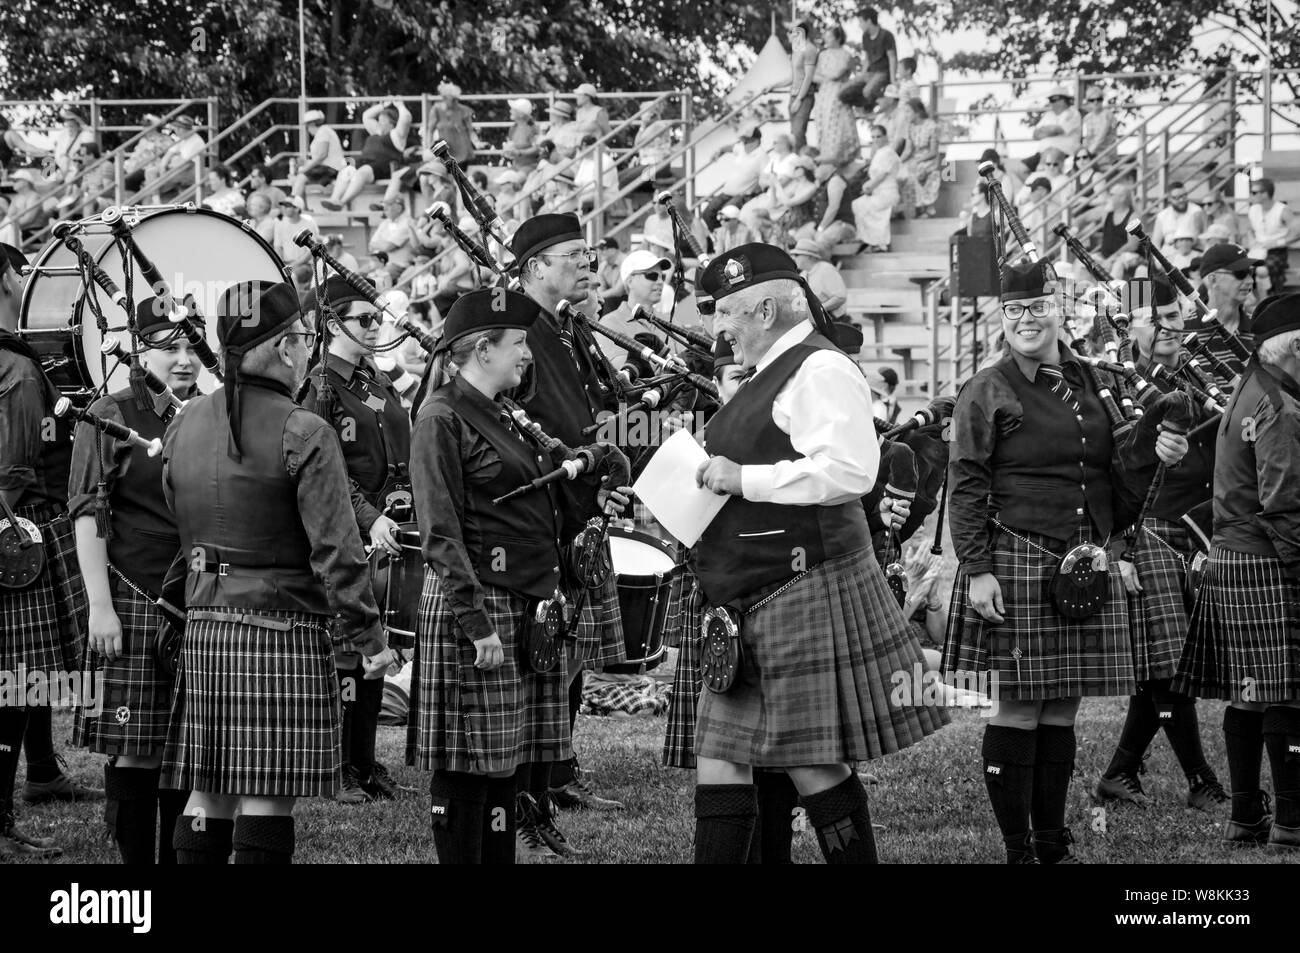 Fergus, Ontario, Canada - 08 11 2018: Over 20 Pipe bands paricipated in the Pipe Band contest held by Pipers and Pipe Band Society of Ontario during F Stock Photo